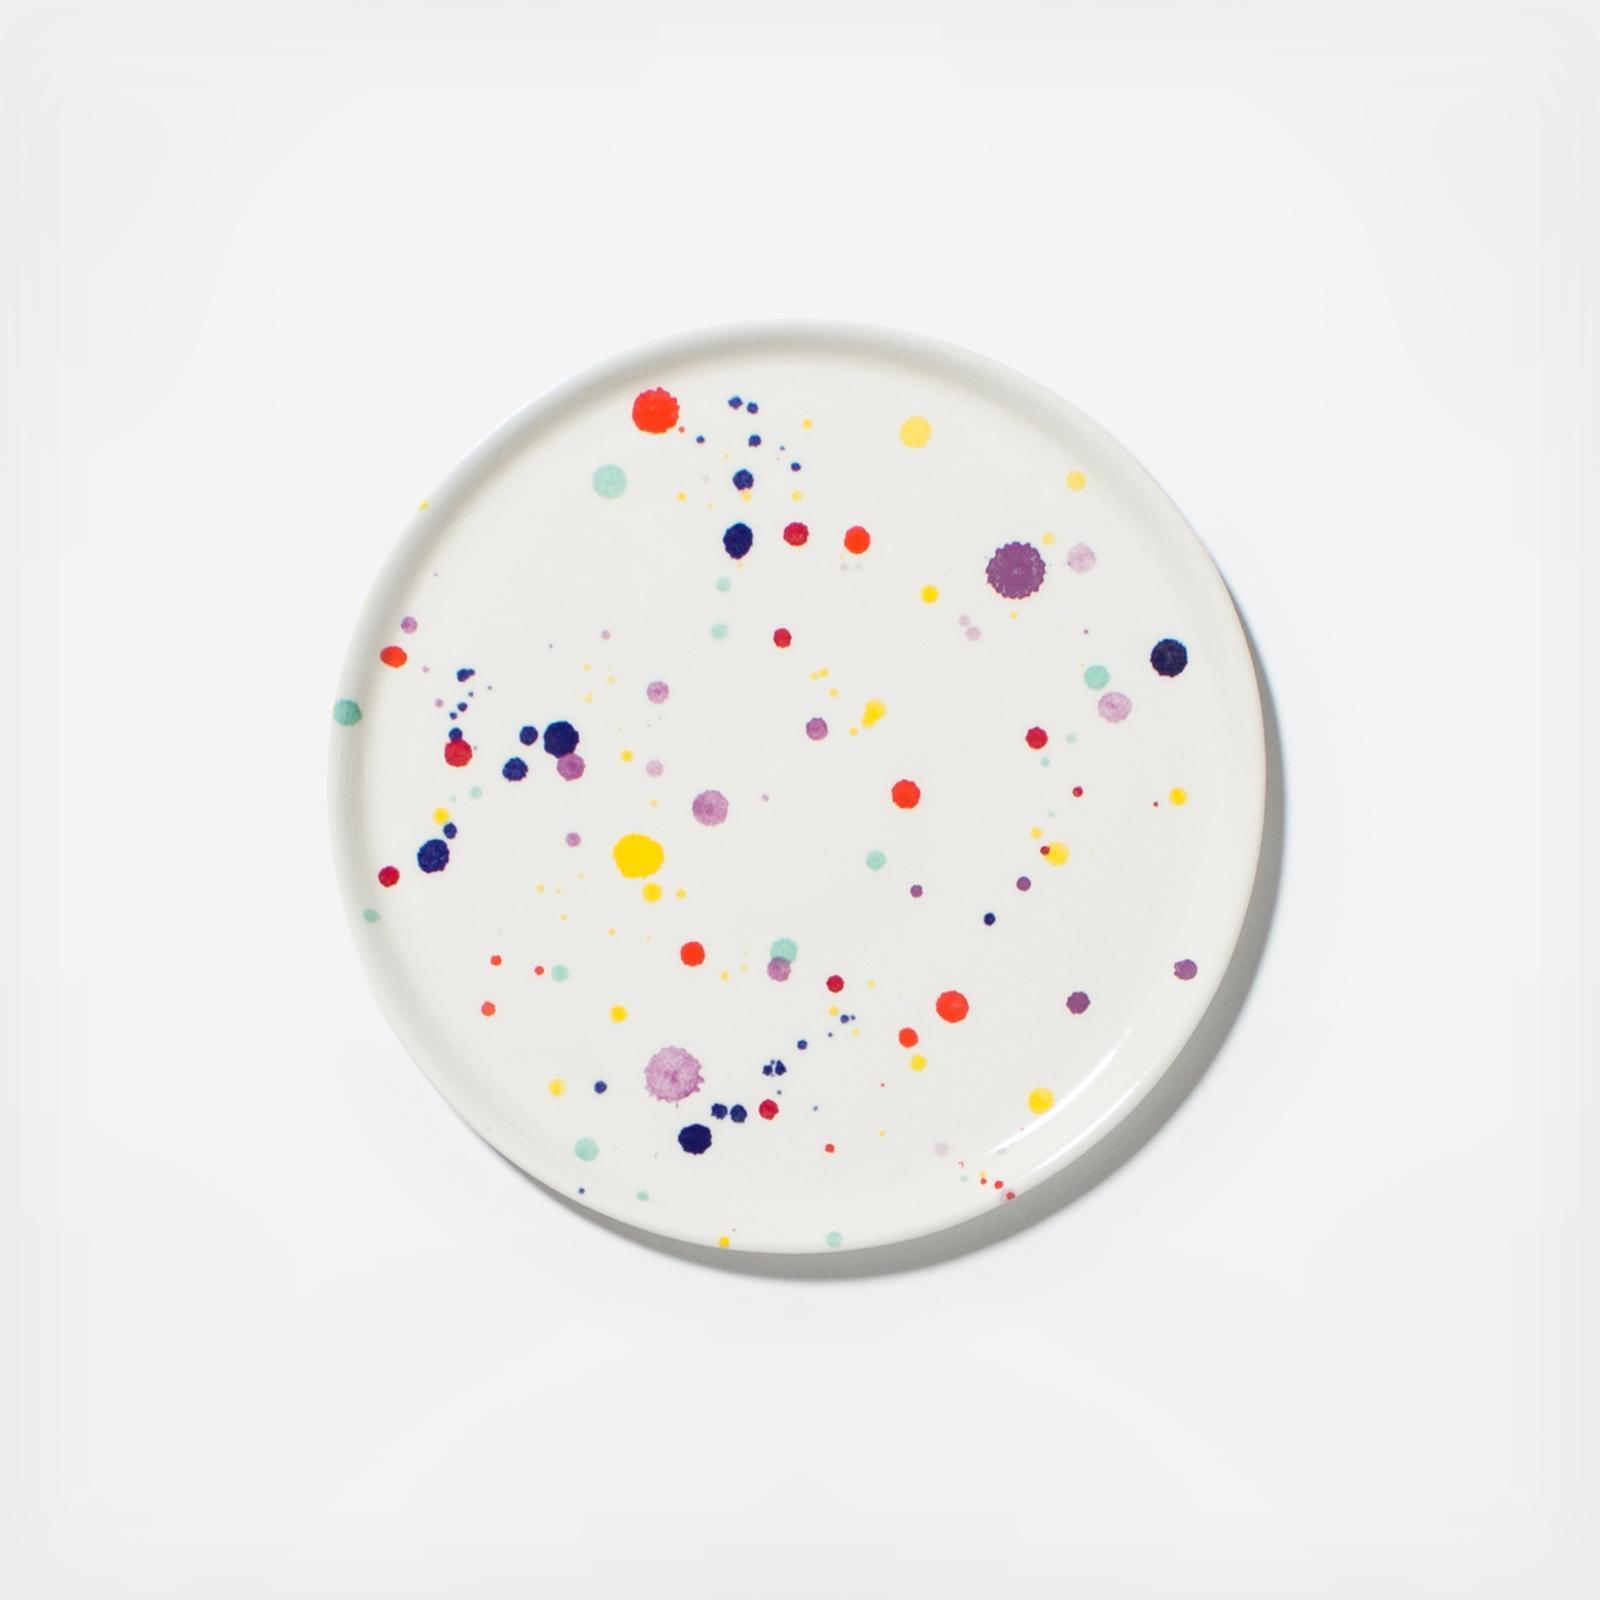 Confetti Share Plate By Felt Fat Wedding Planning Registry Gifts